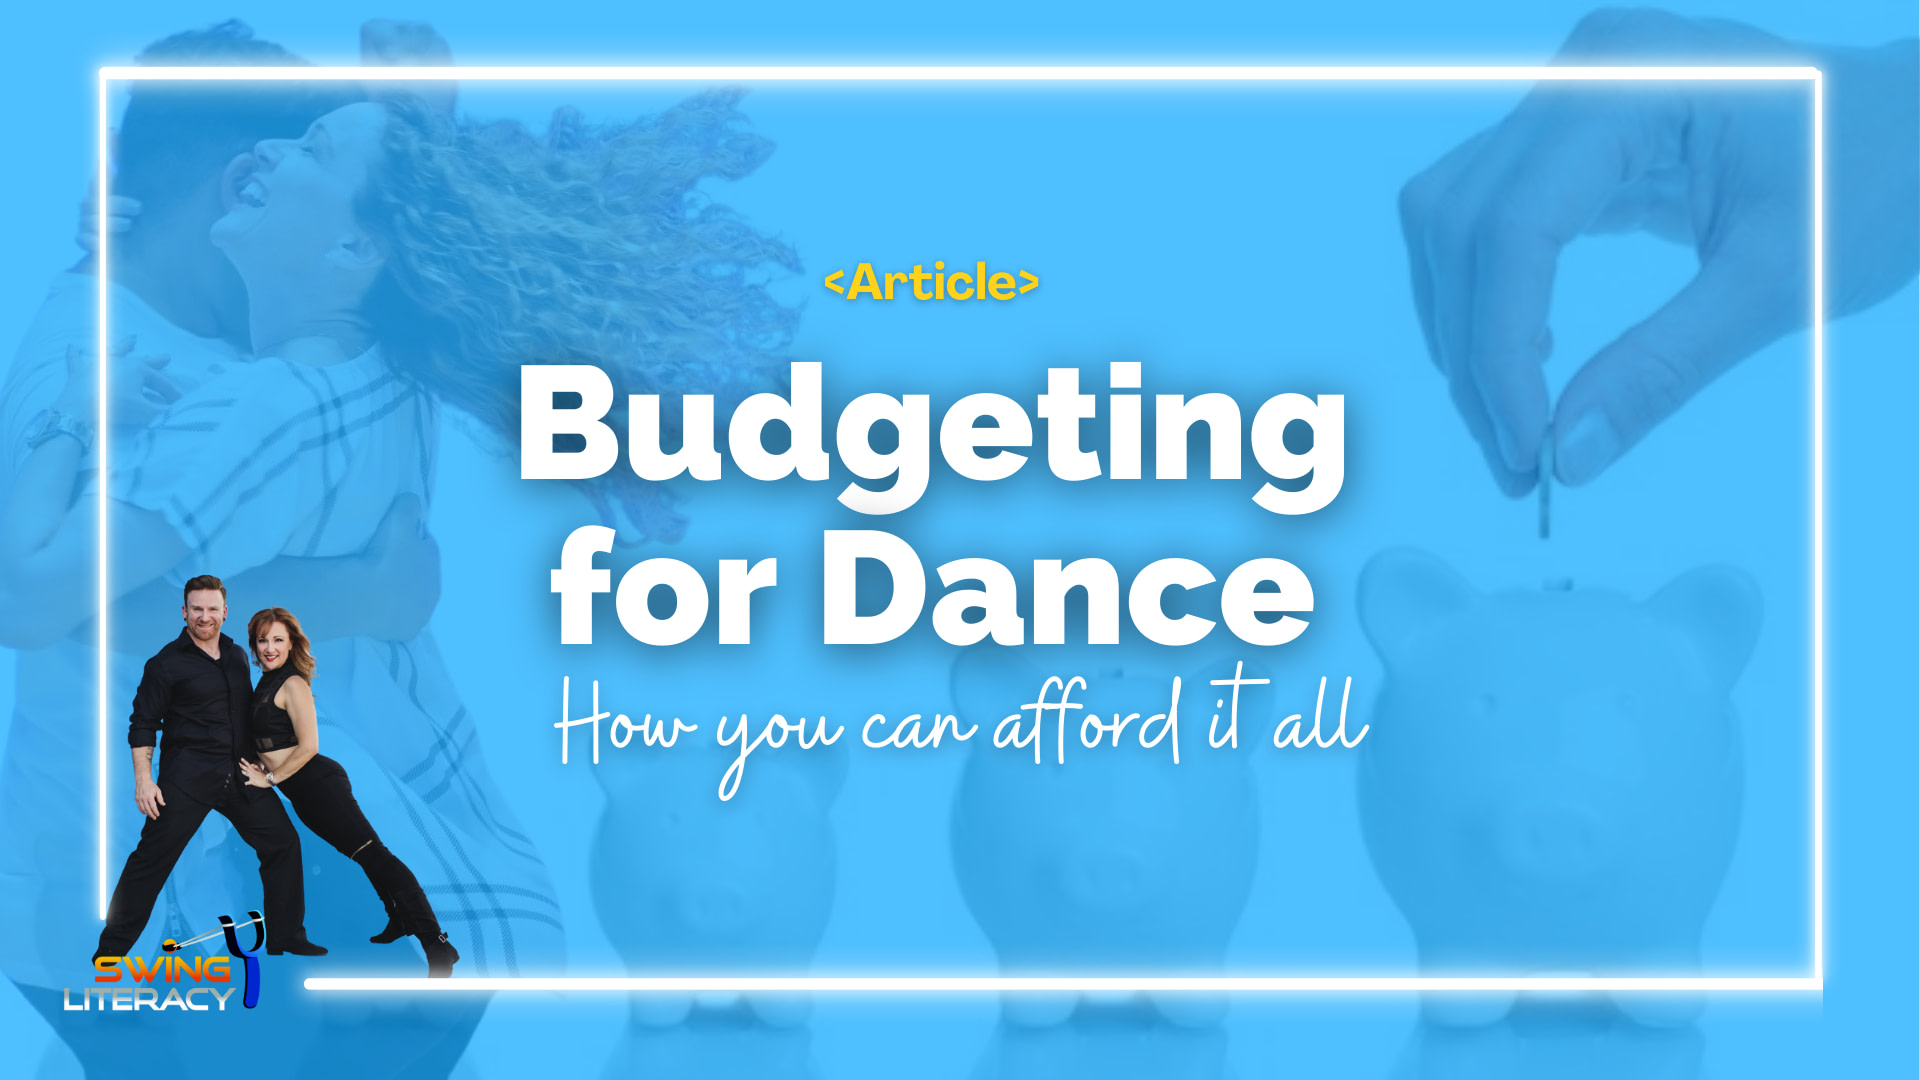 Budgeting for Dance